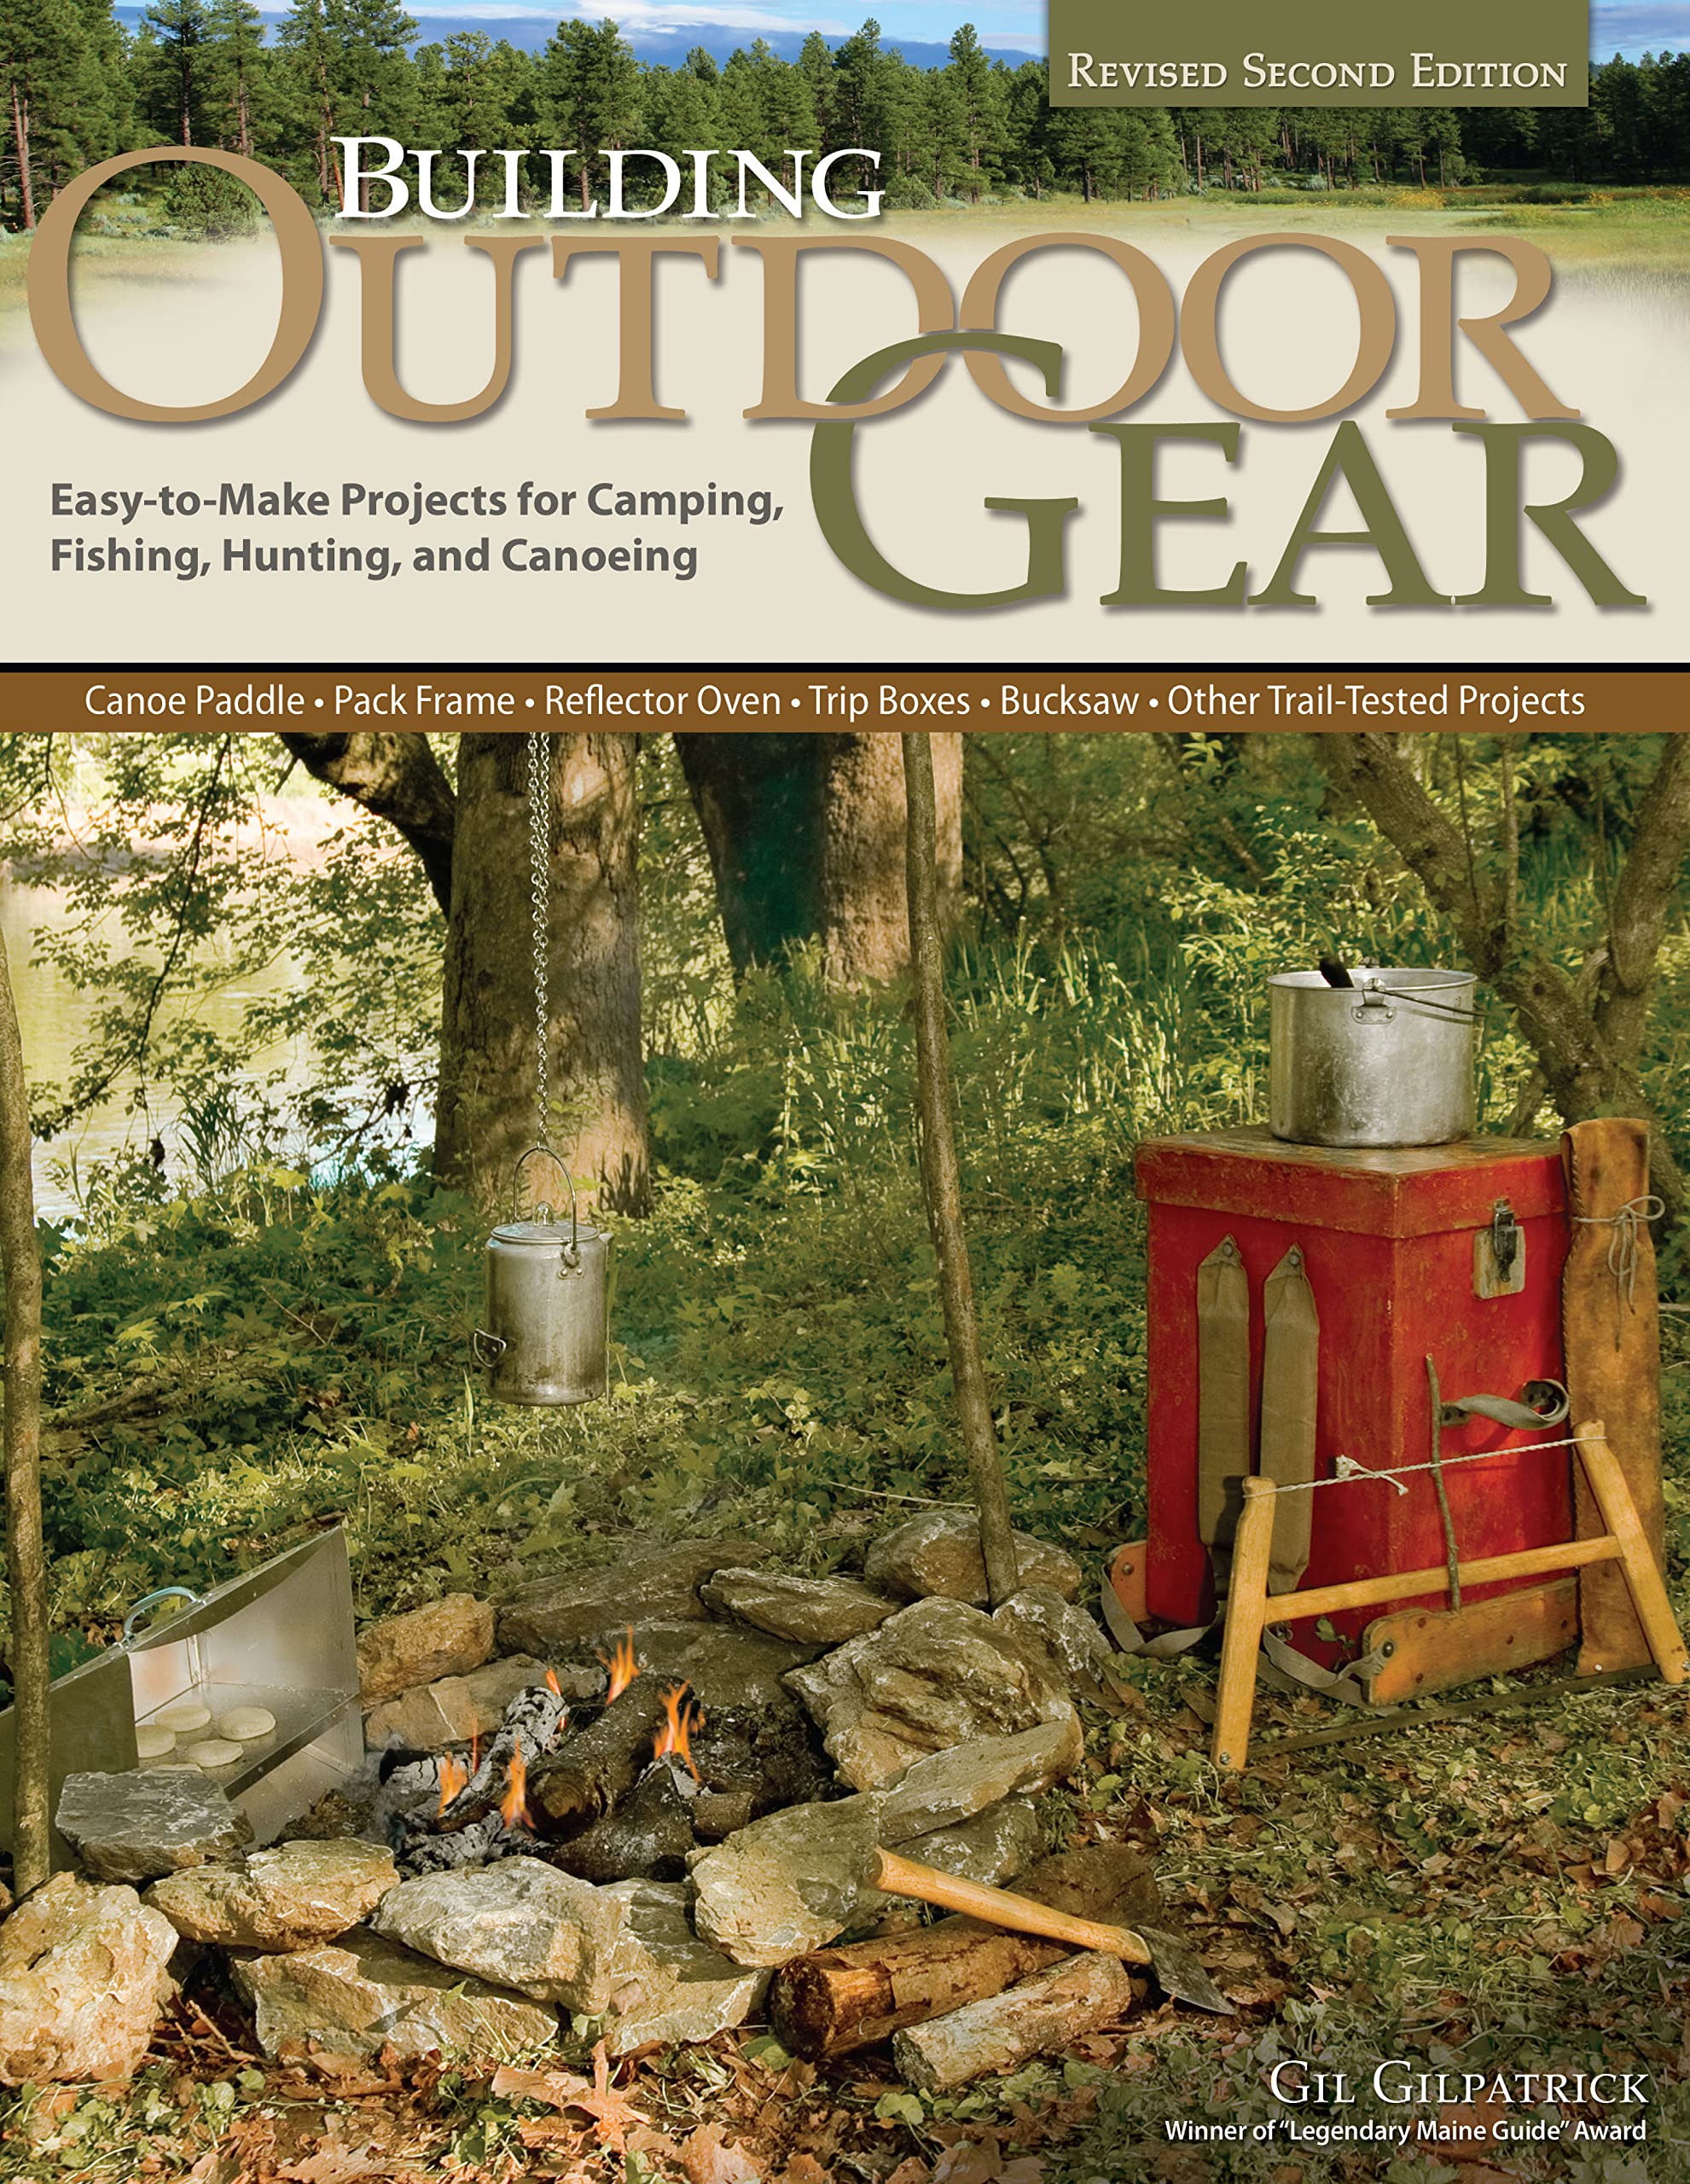 Building Outdoor Gear, Revised 2nd Edition: Easy-to-Make Projects for Camping, Fishing, Hunting, & Canoeing: Canoe Paddle, Pack Frame, Reflector Oven, Trip Boxes, Bucksaw & Other Trail-Tested Projects - 7604